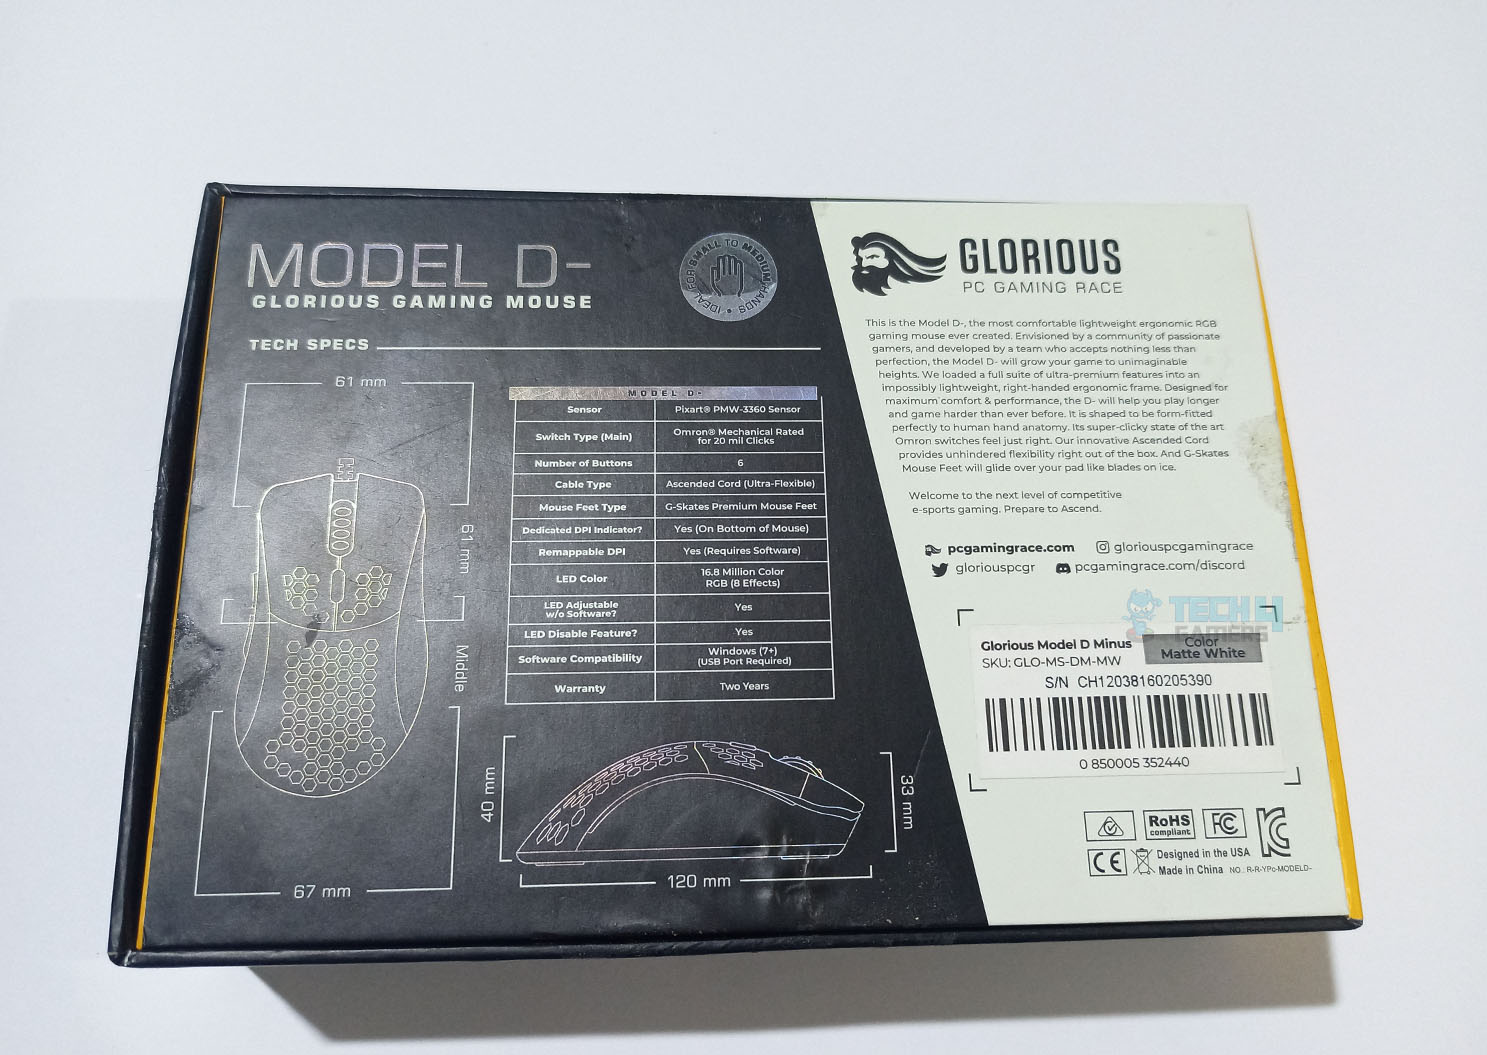 Glorious Model D Minus Packaging and Unboxing